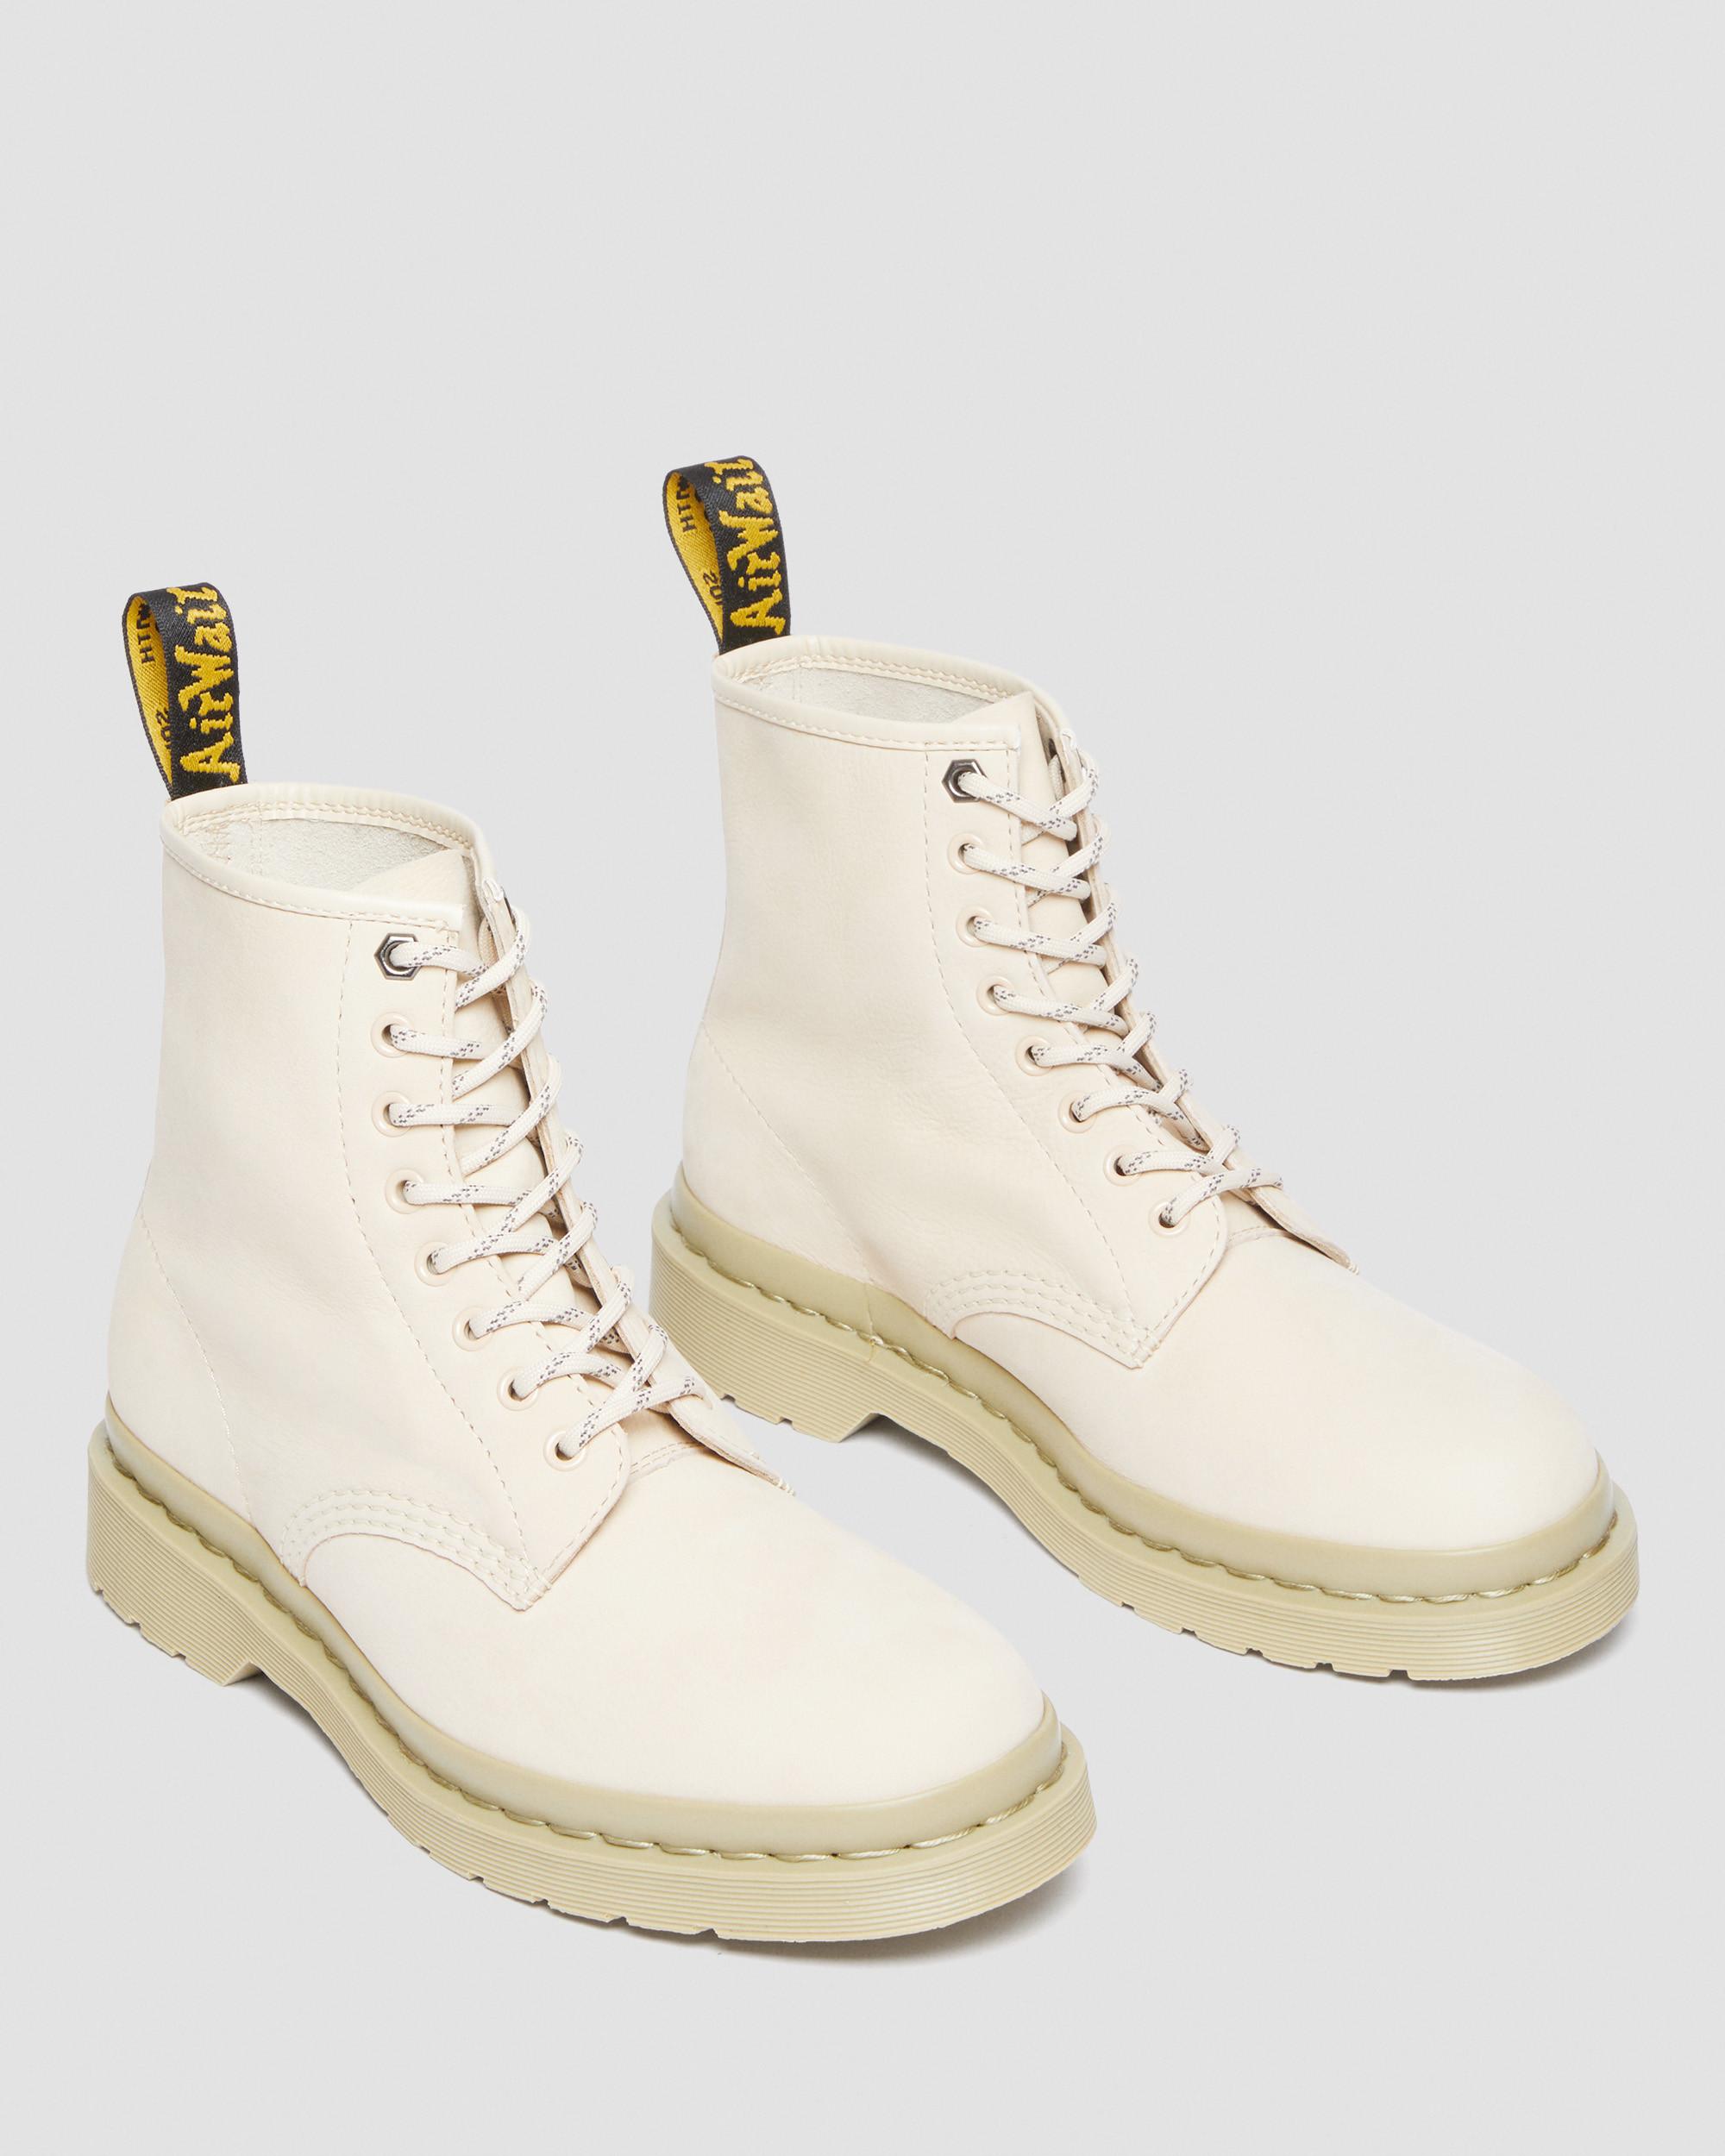 Dr. Martens, 1460 Mono Milled Nubuck Leather Lace Up Boots in Cream, Size 5